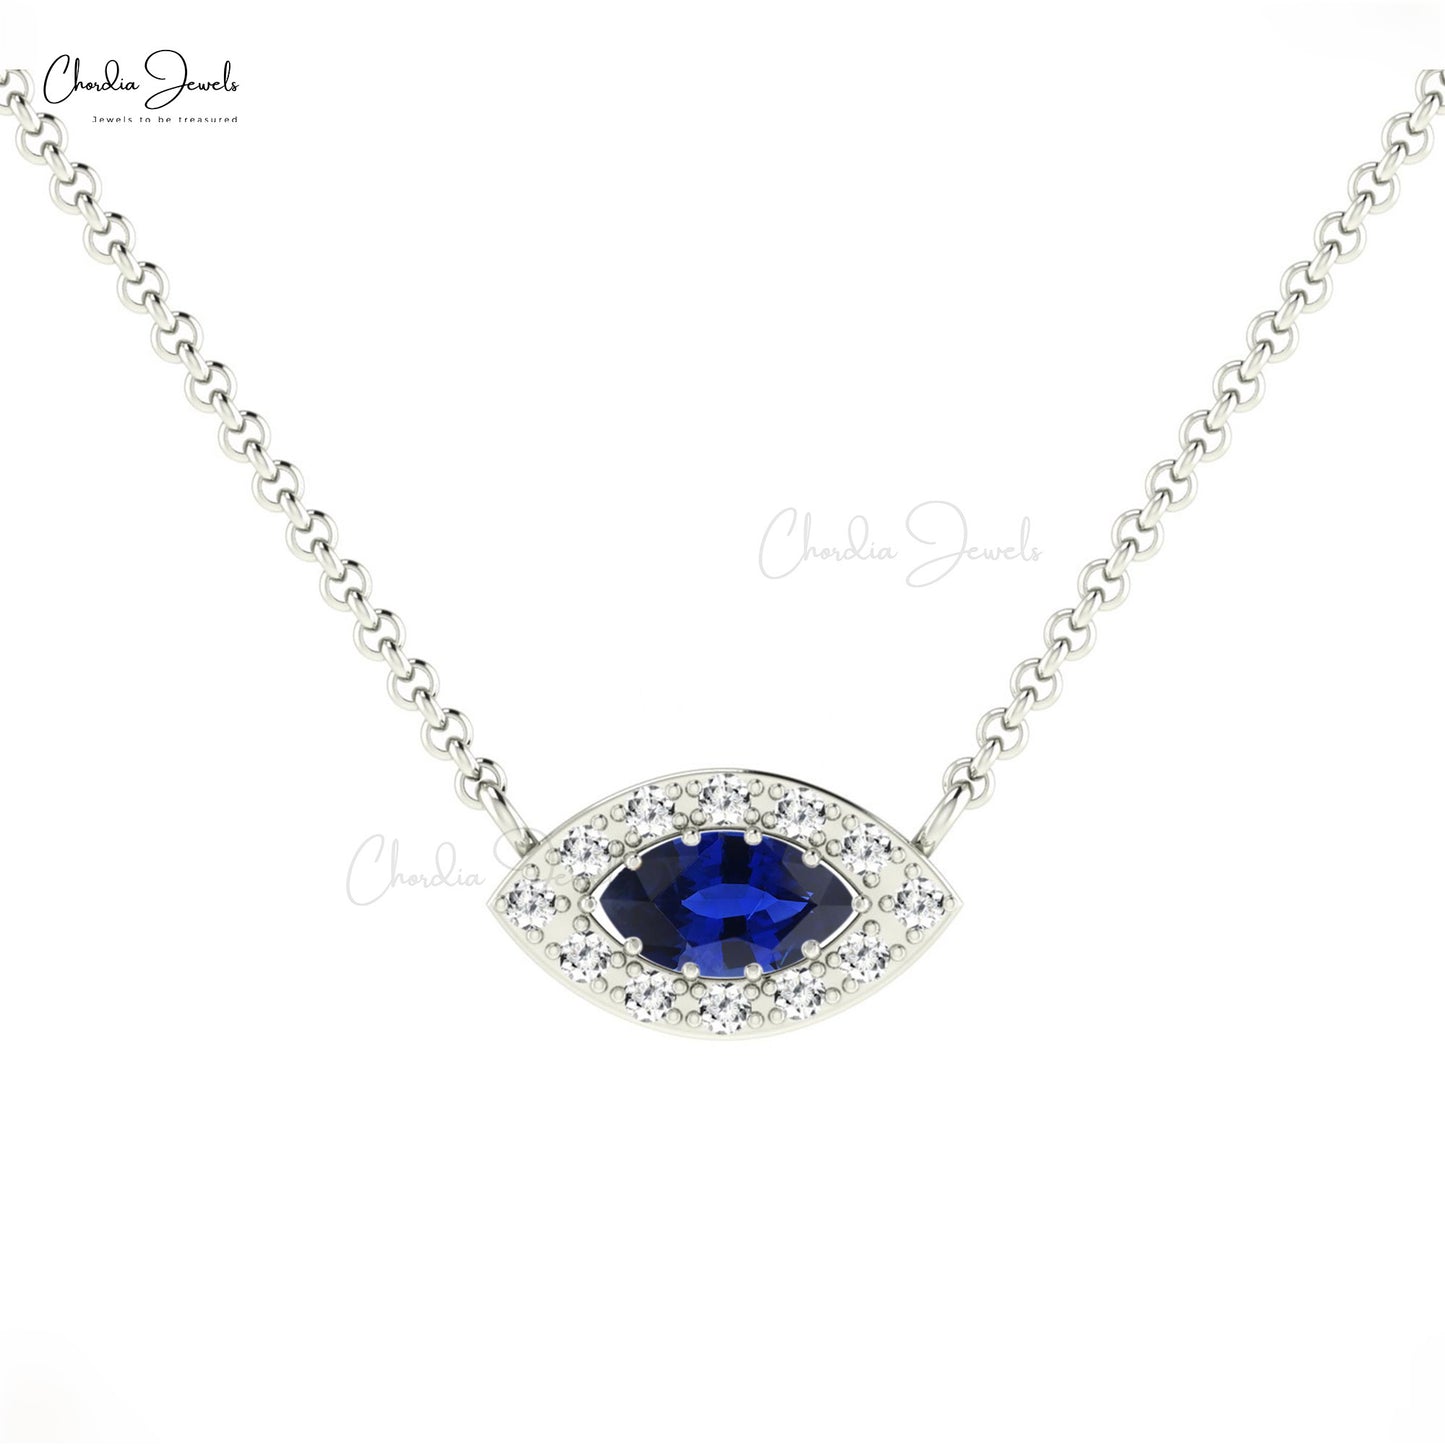 Natural White Diamond Halo Necklace Pendant Marquise Shape Blue Sapphire Gemstone Necklace in 14k Pure Gold 